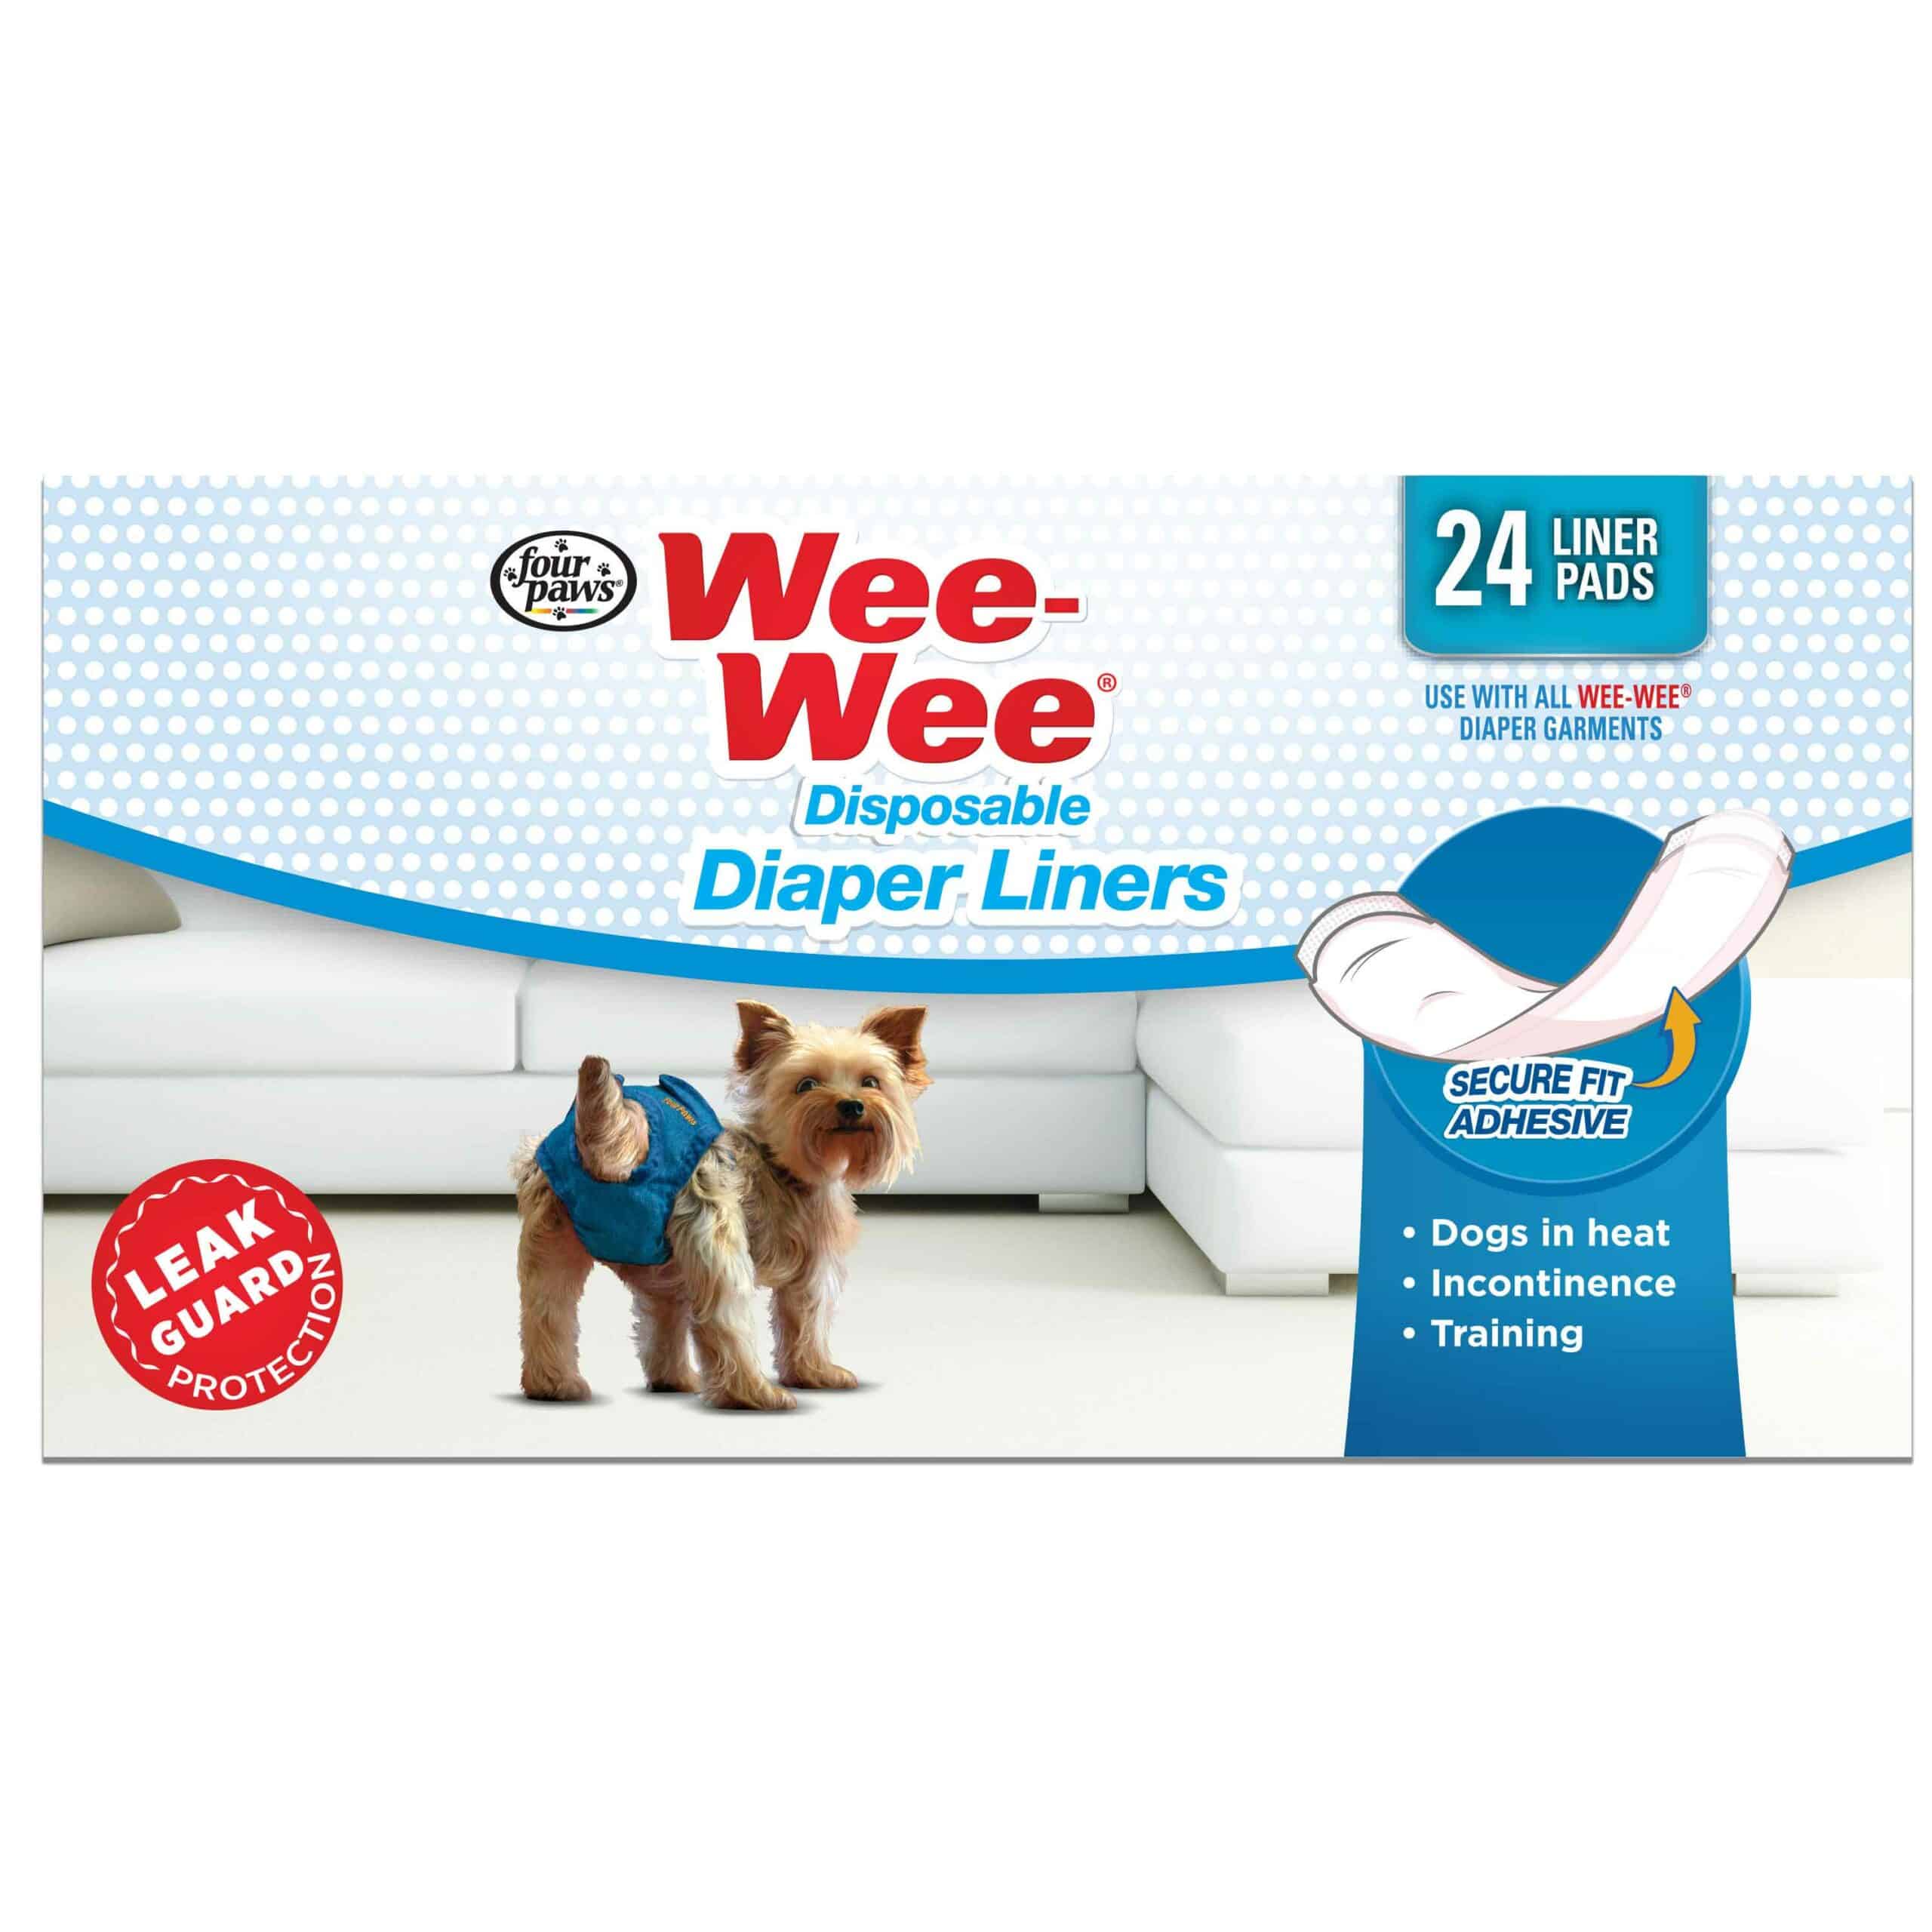 100523616-scaled-2 Wee-Wee Super Absorbent Disposable Dog Diaper Liners 24 count